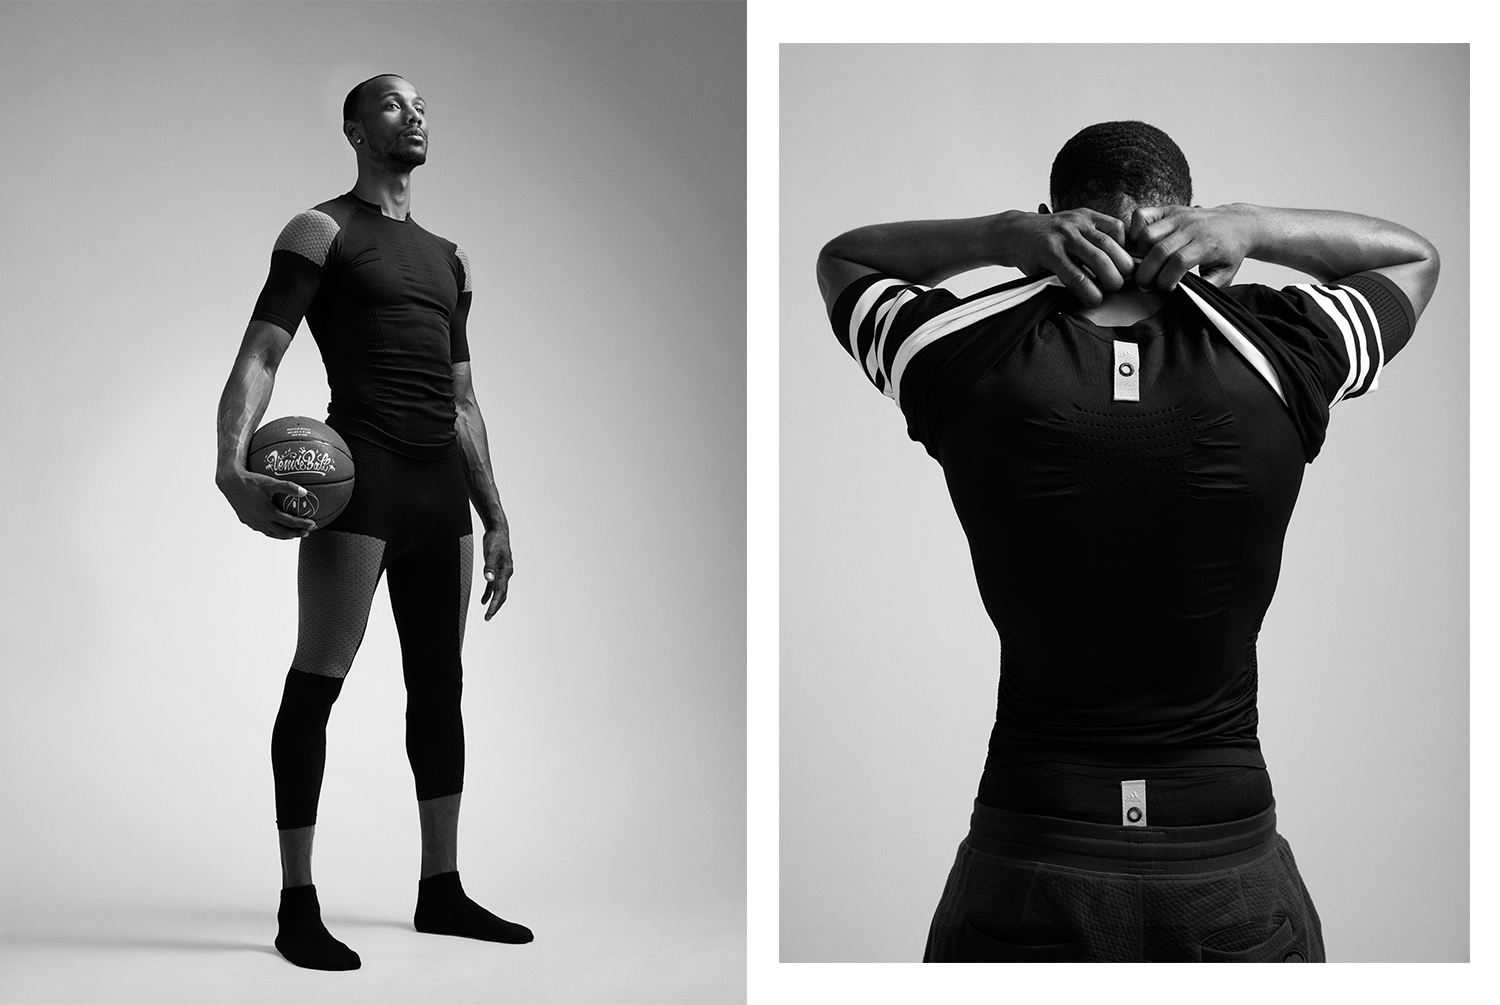 Two outfit shots of a Veniceball League player with in an Adidas outfit photographed by Maximilian Baier